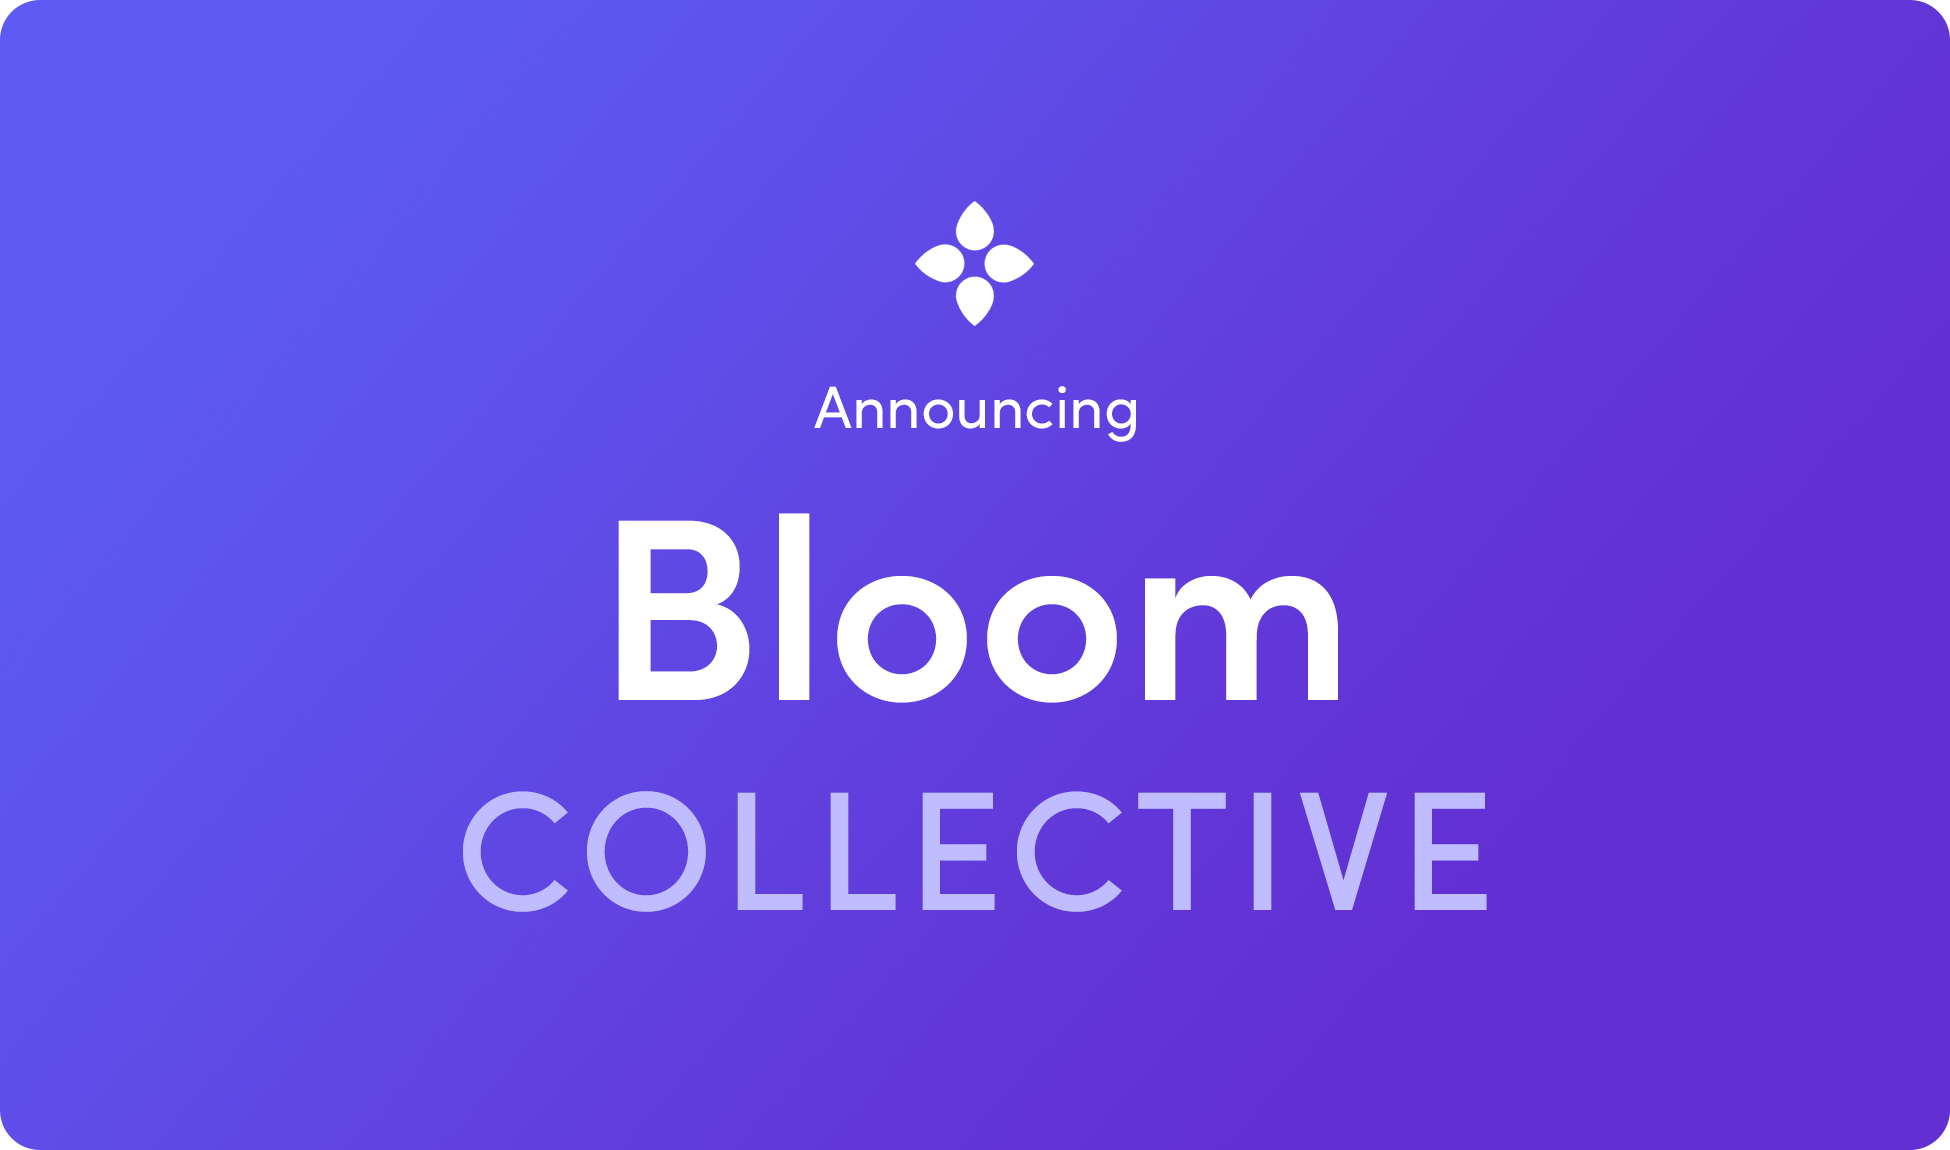 bloom collective